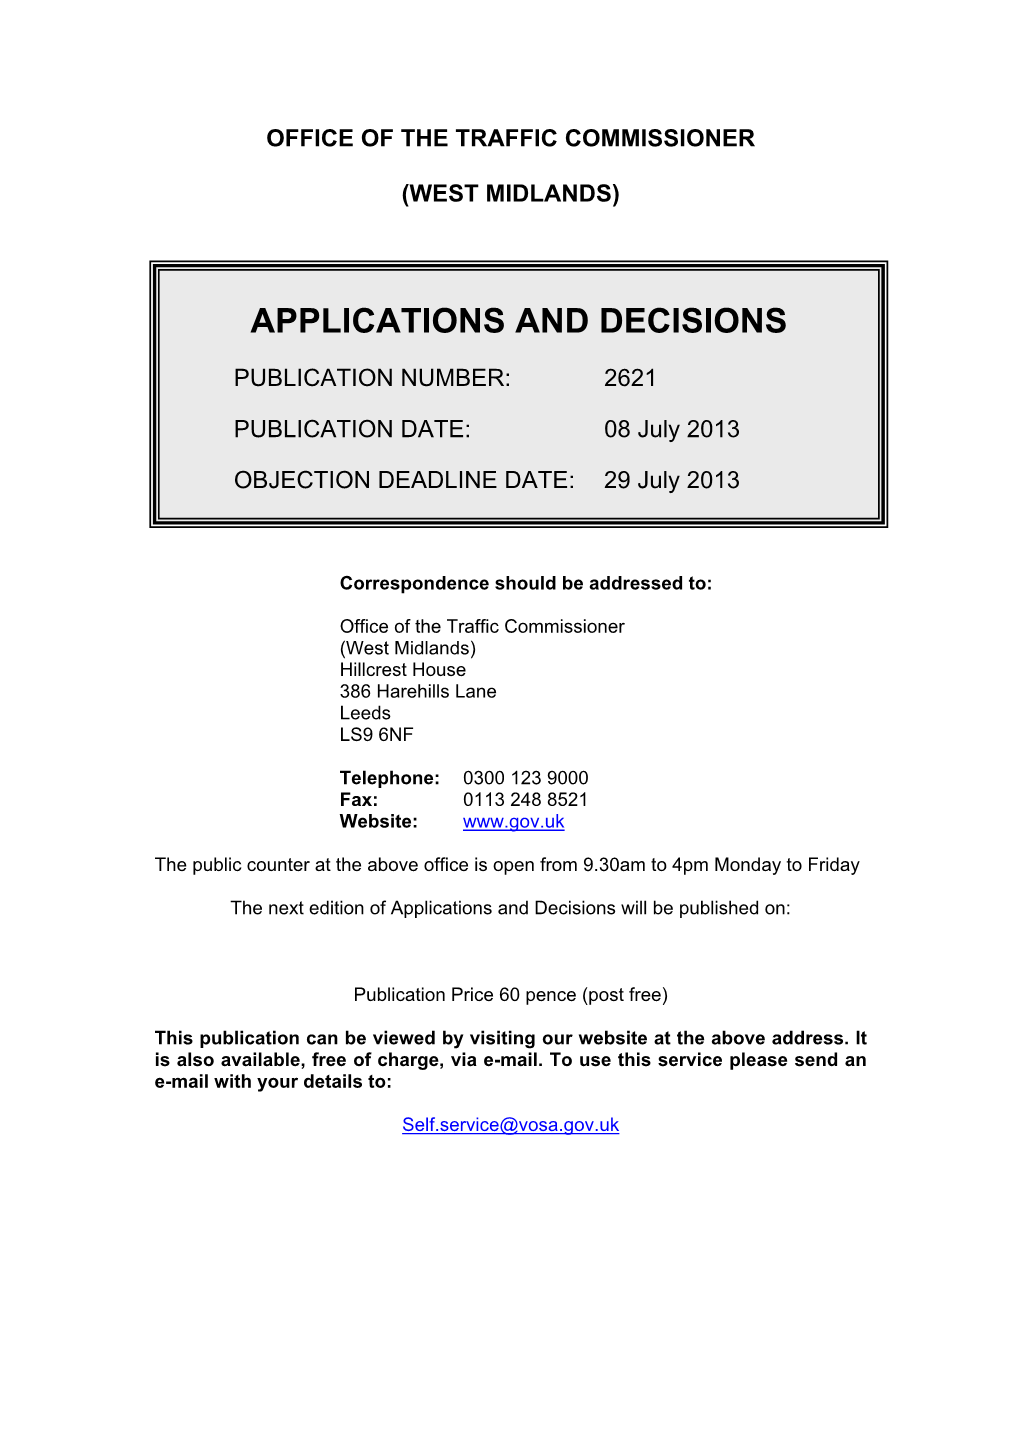 Applications and Decisions: West Midlands: Objection Deadline 29 July 2013